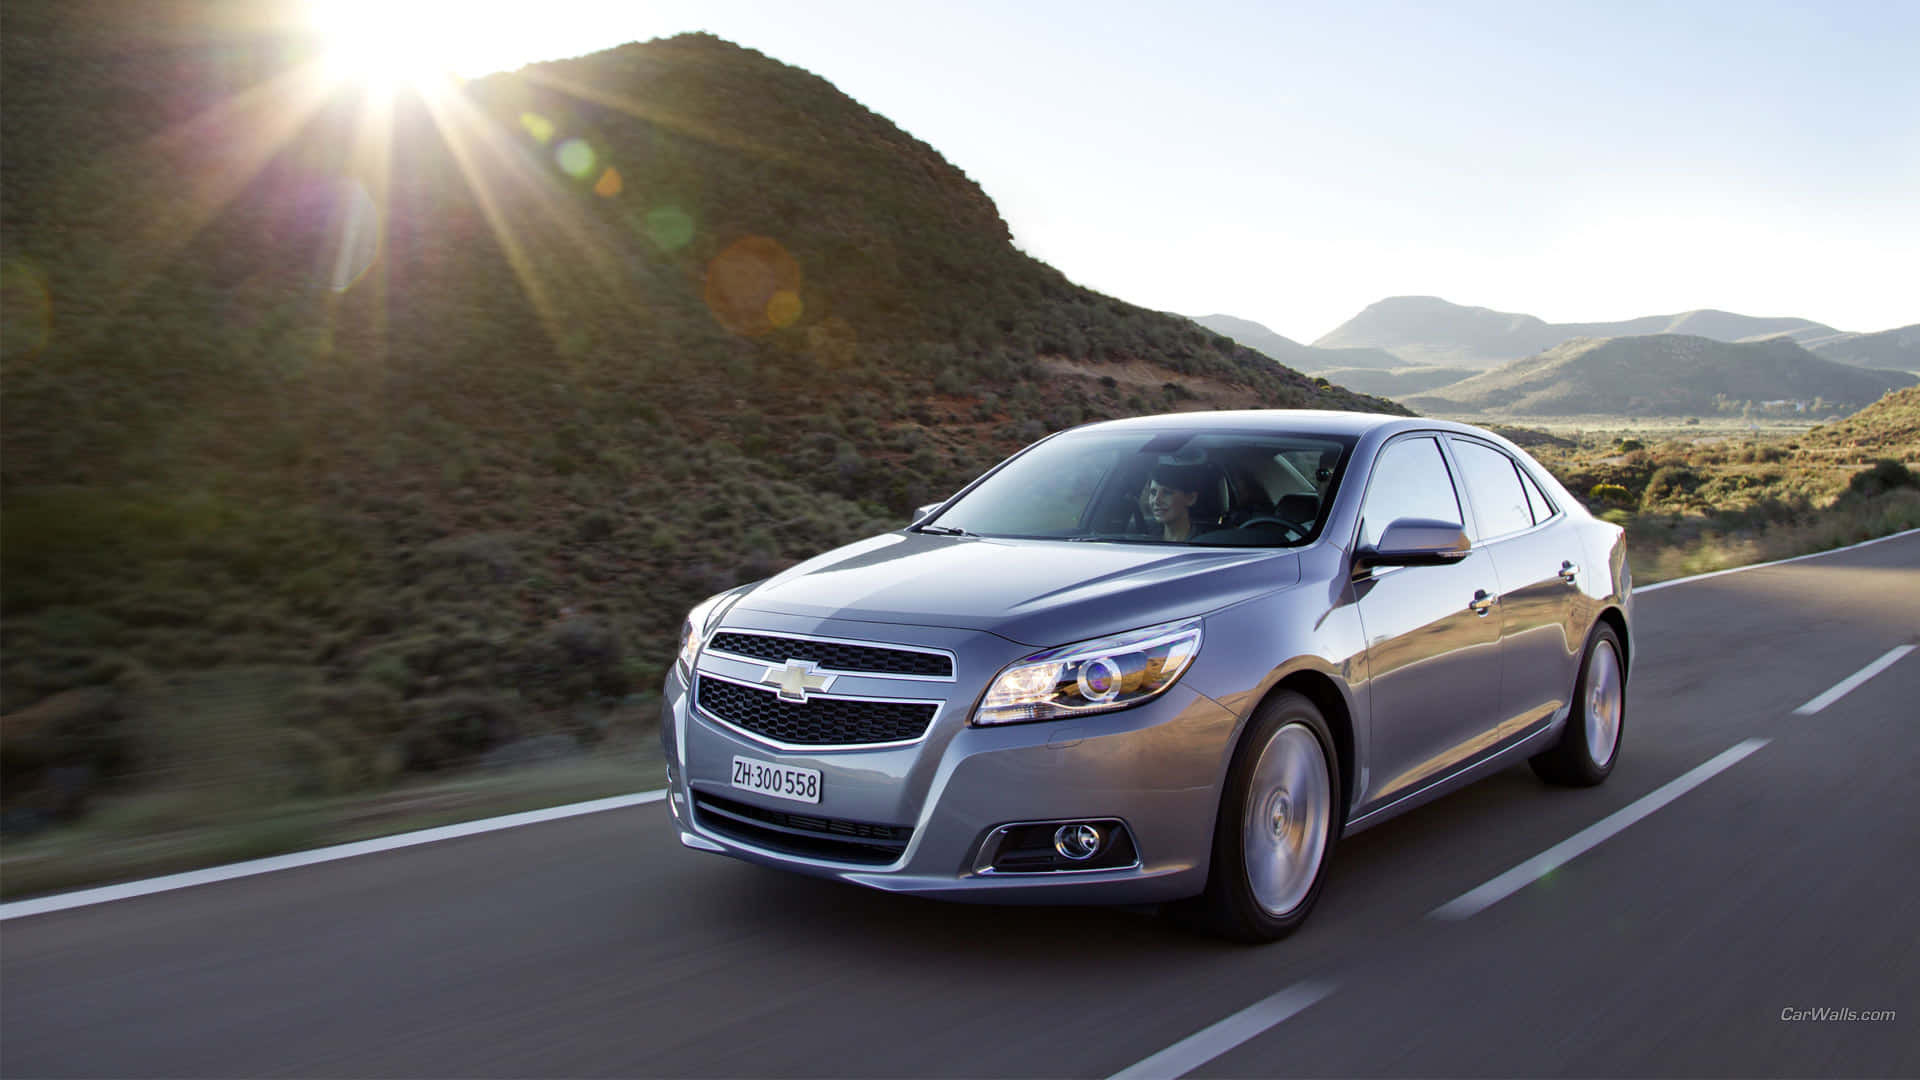 "Take the Journey in this Stylish Chevy Malibu" Wallpaper